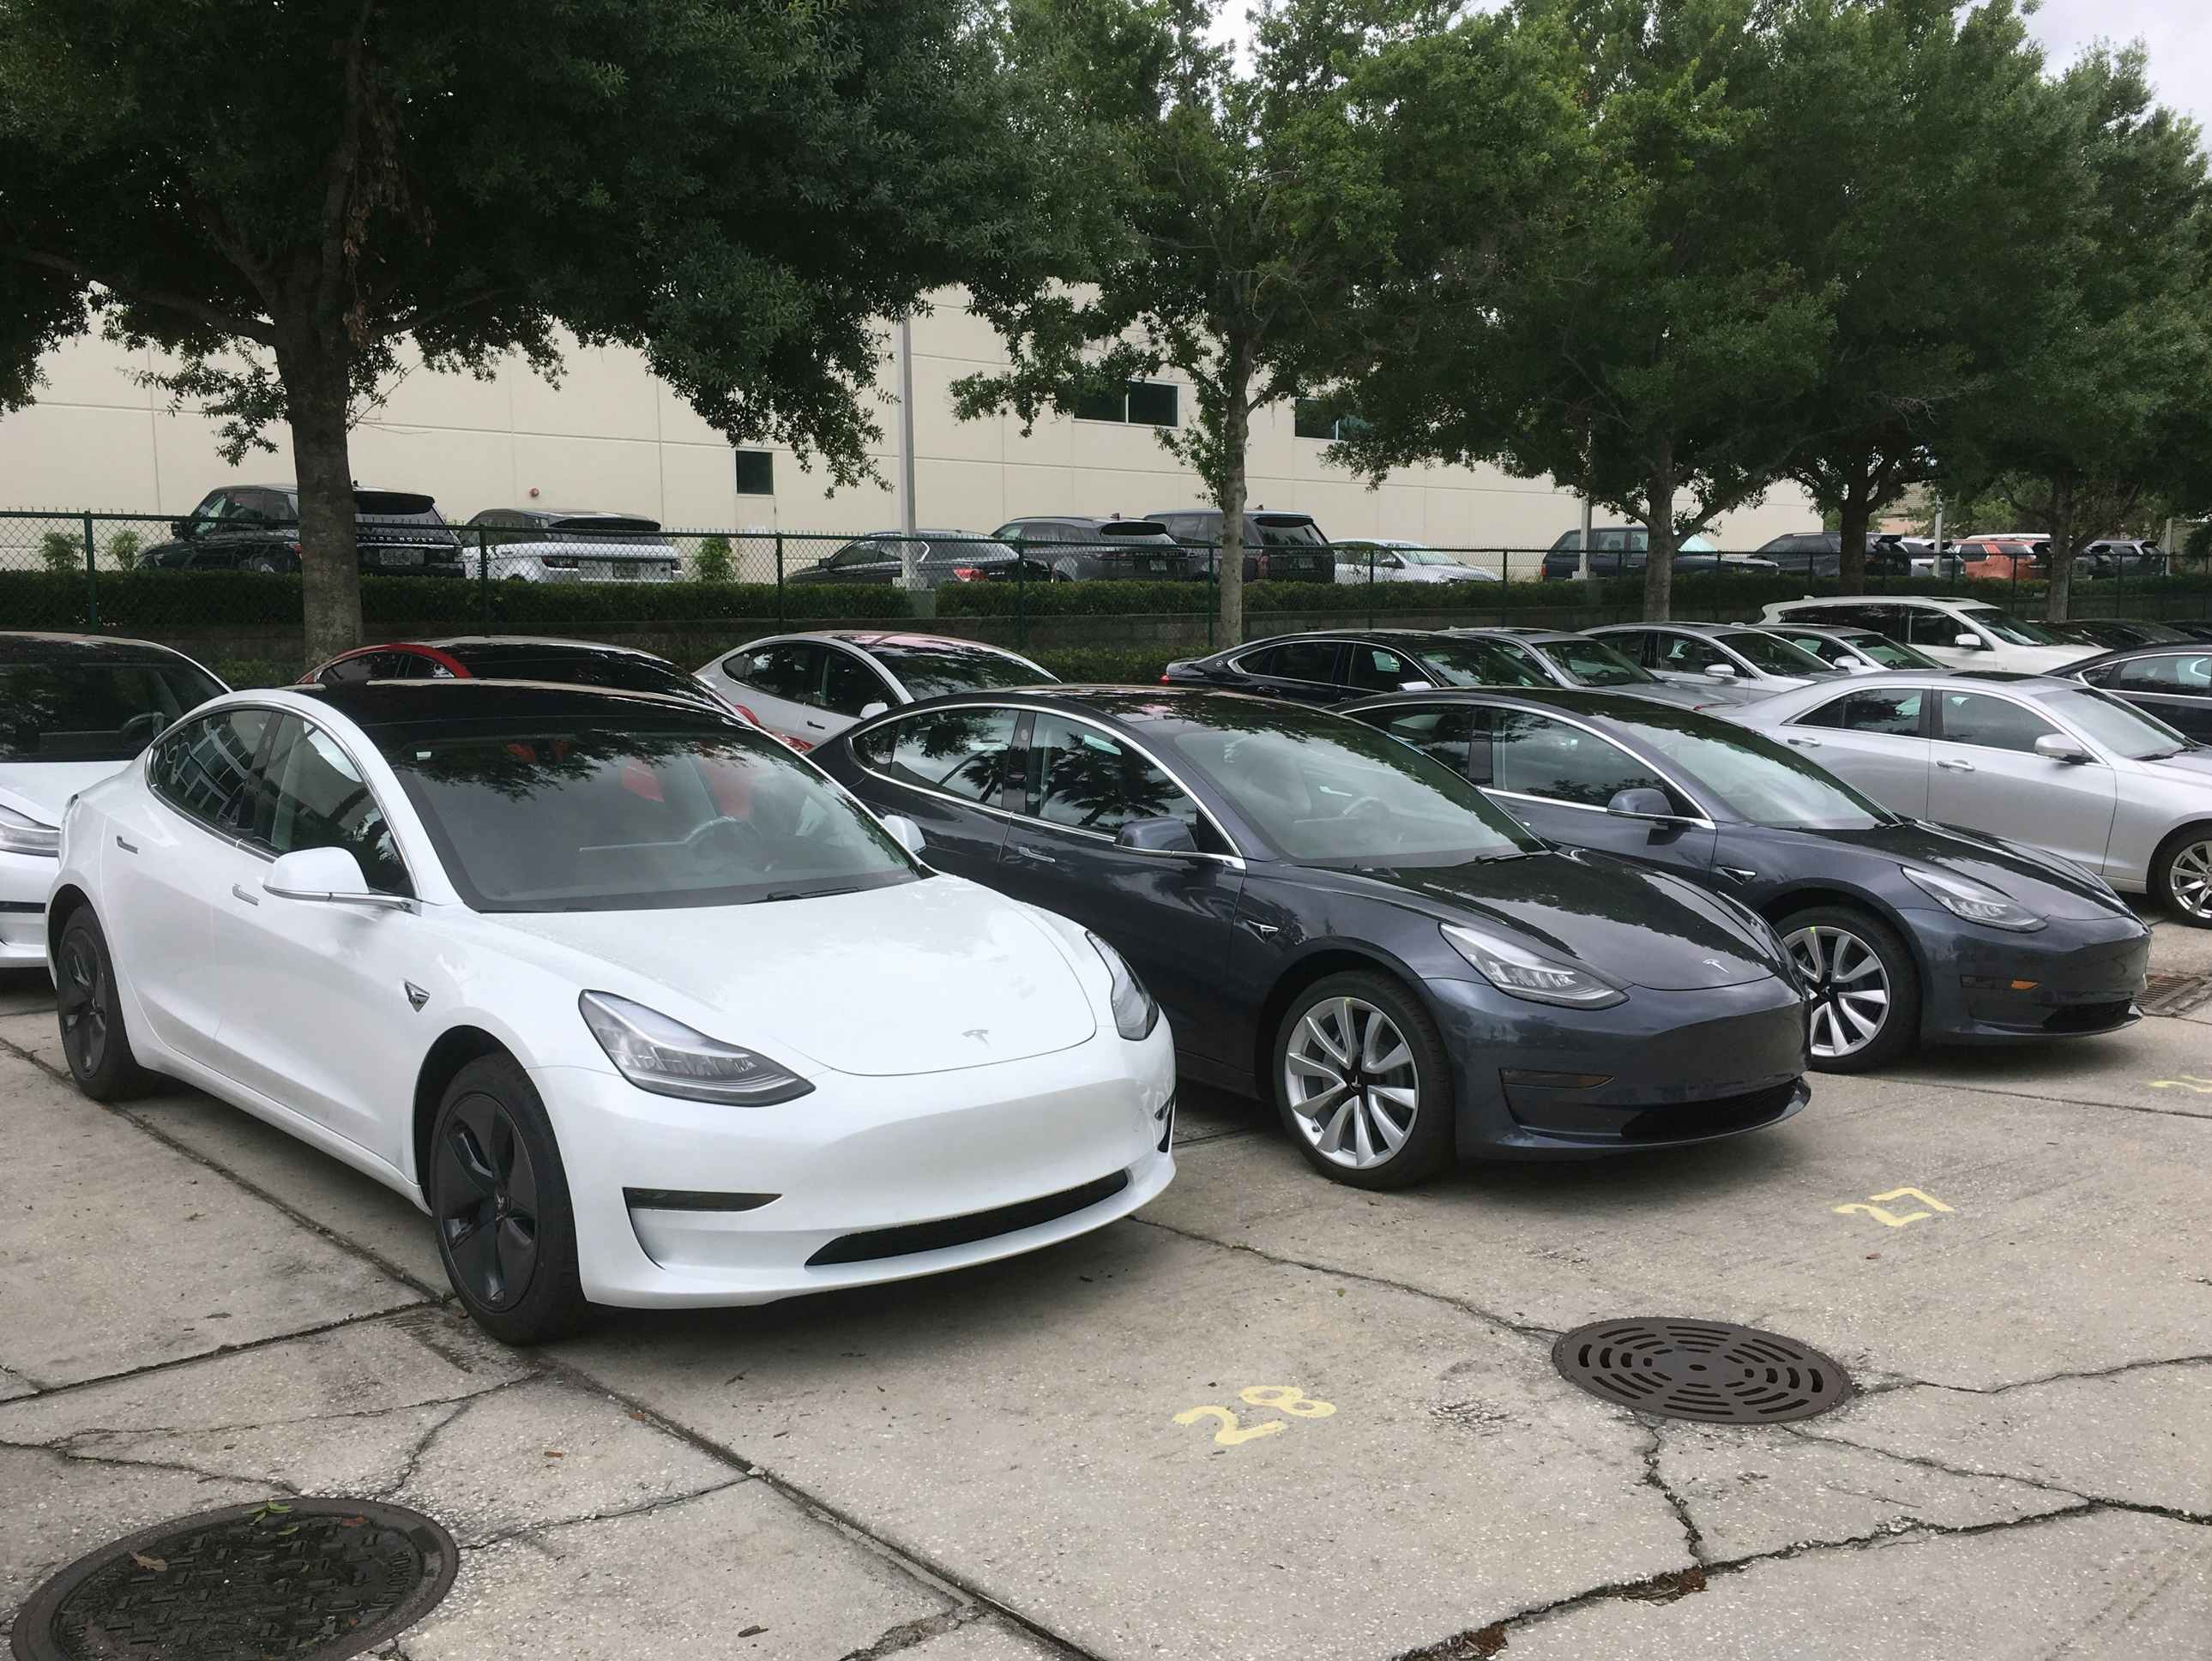 A parking lot full of Tesla model 3 electric vehicles